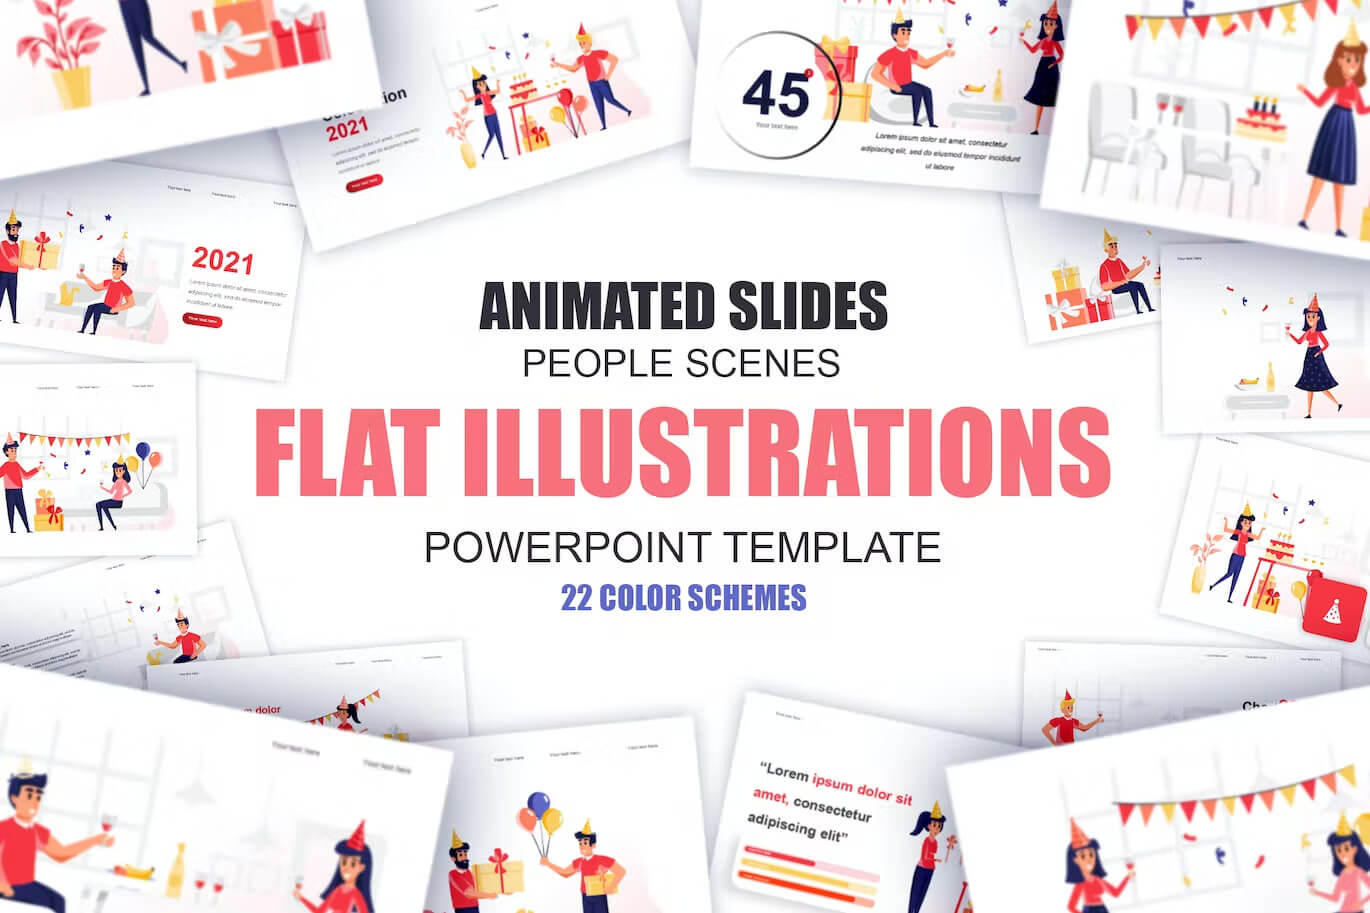 Chart infographic of flat illustrations.